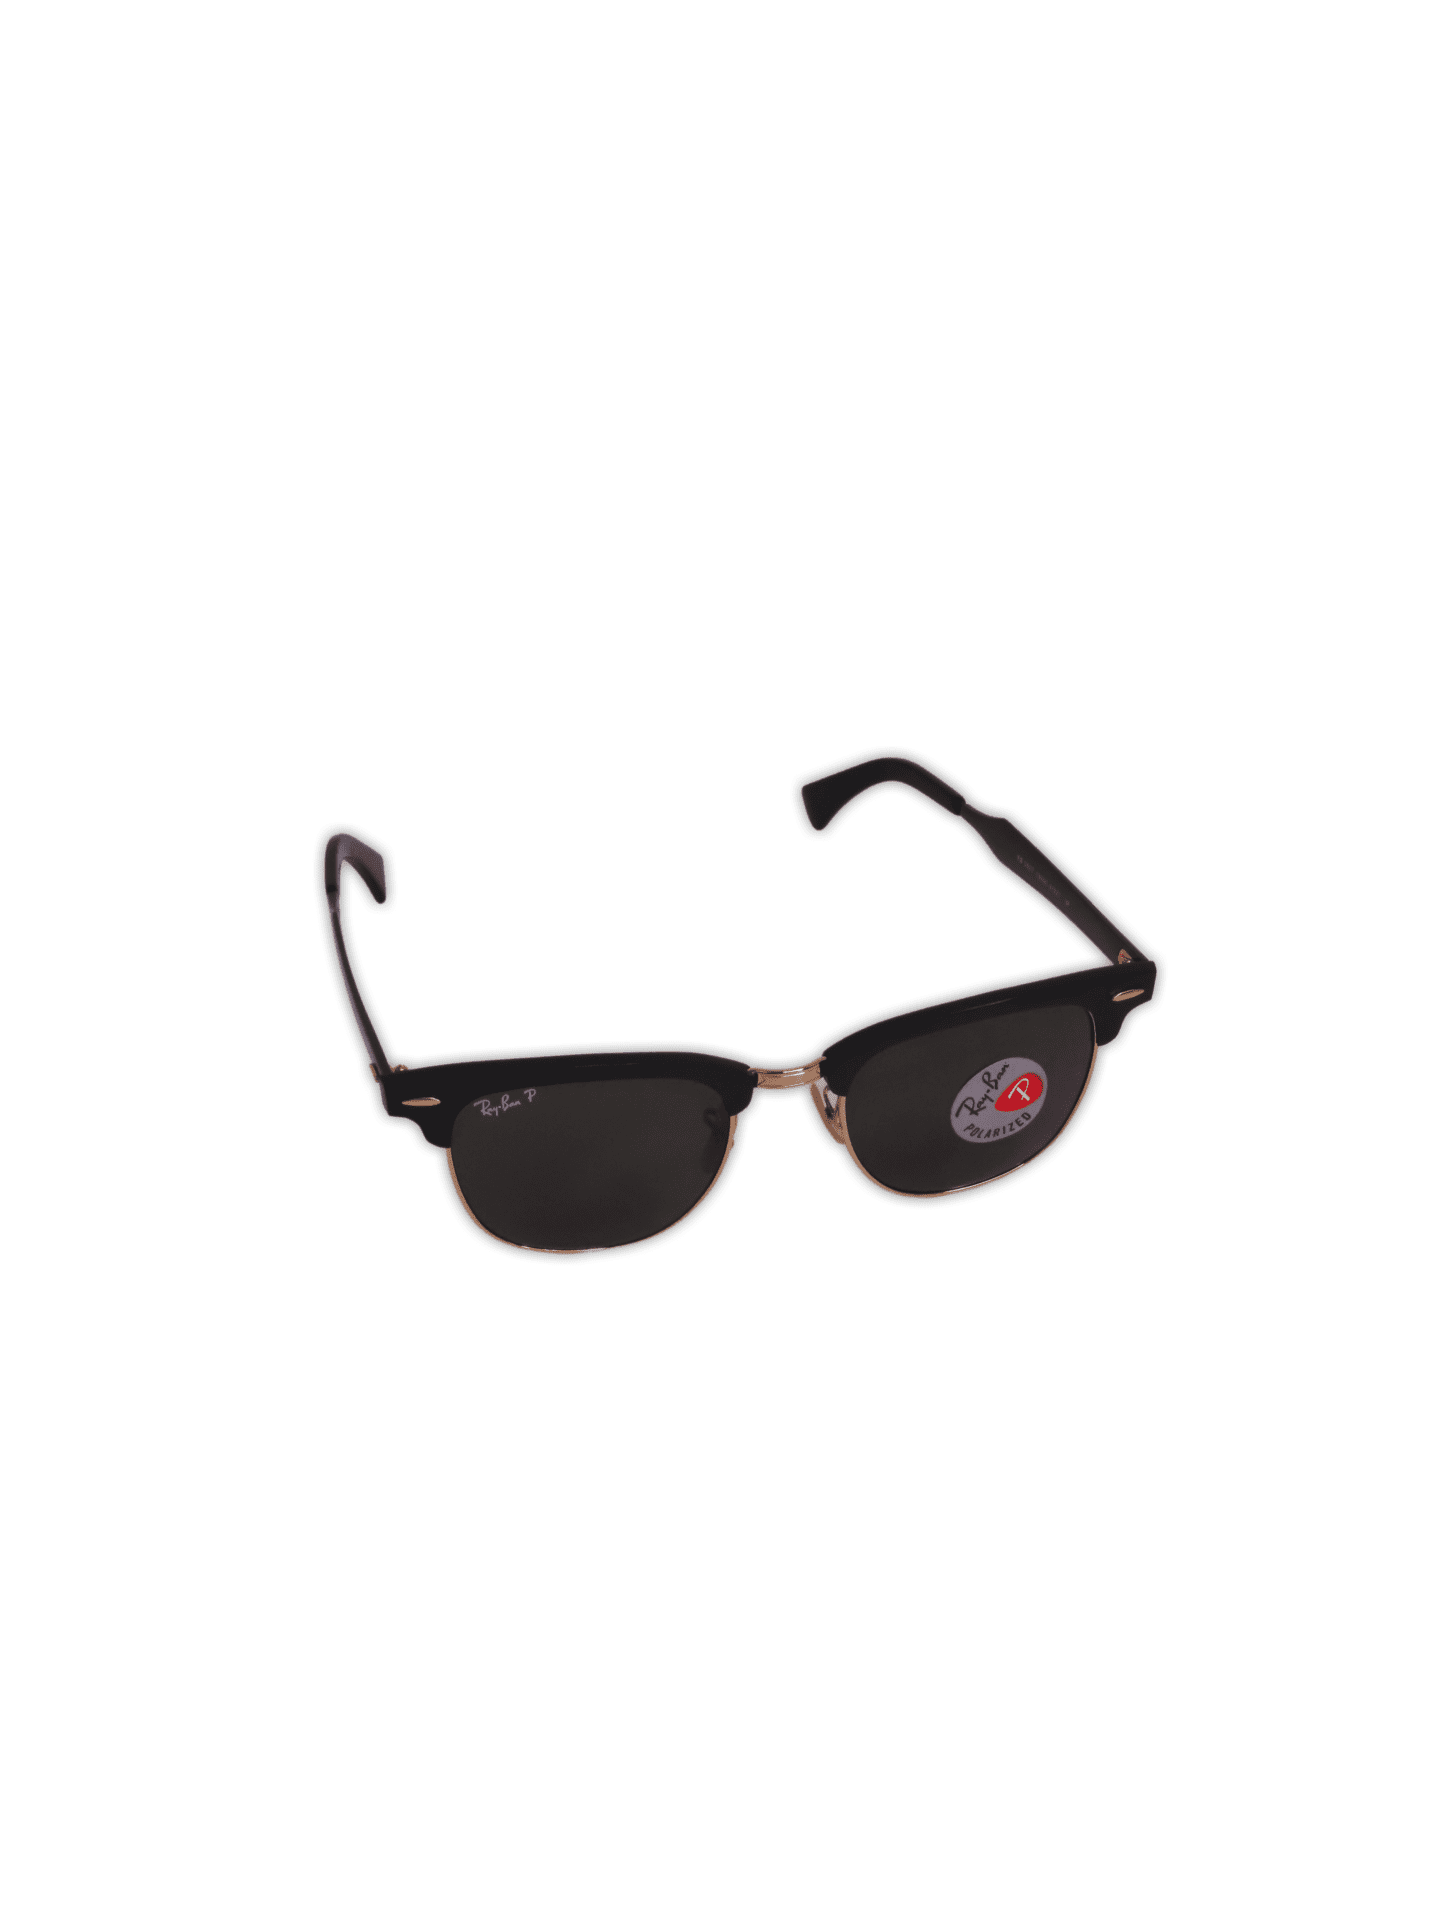 Never fail to make a statement with the Ray-Ban Clubmaster Polarized sunglasses. Inspired by the 50’s, the unmistakable design of the Clubmaster Classic is worn by cultural intellectuals, those who lead the changed tomorrow. Made from Acetate with lens made from glass and features a Black Frame with Metal detail elements. 